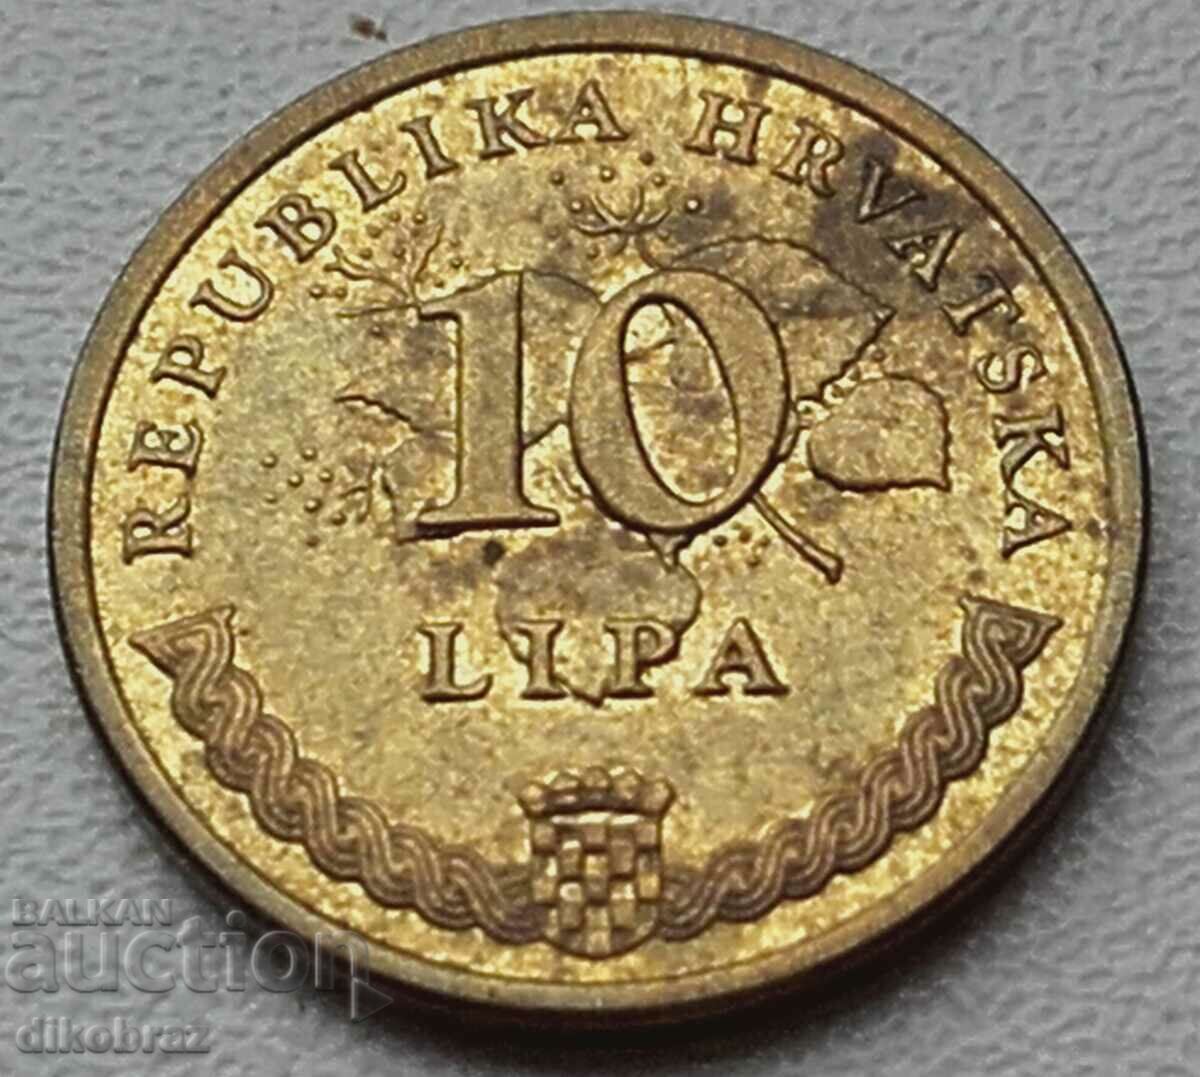 Croatia - 2016 - 10 lindens - from a penny